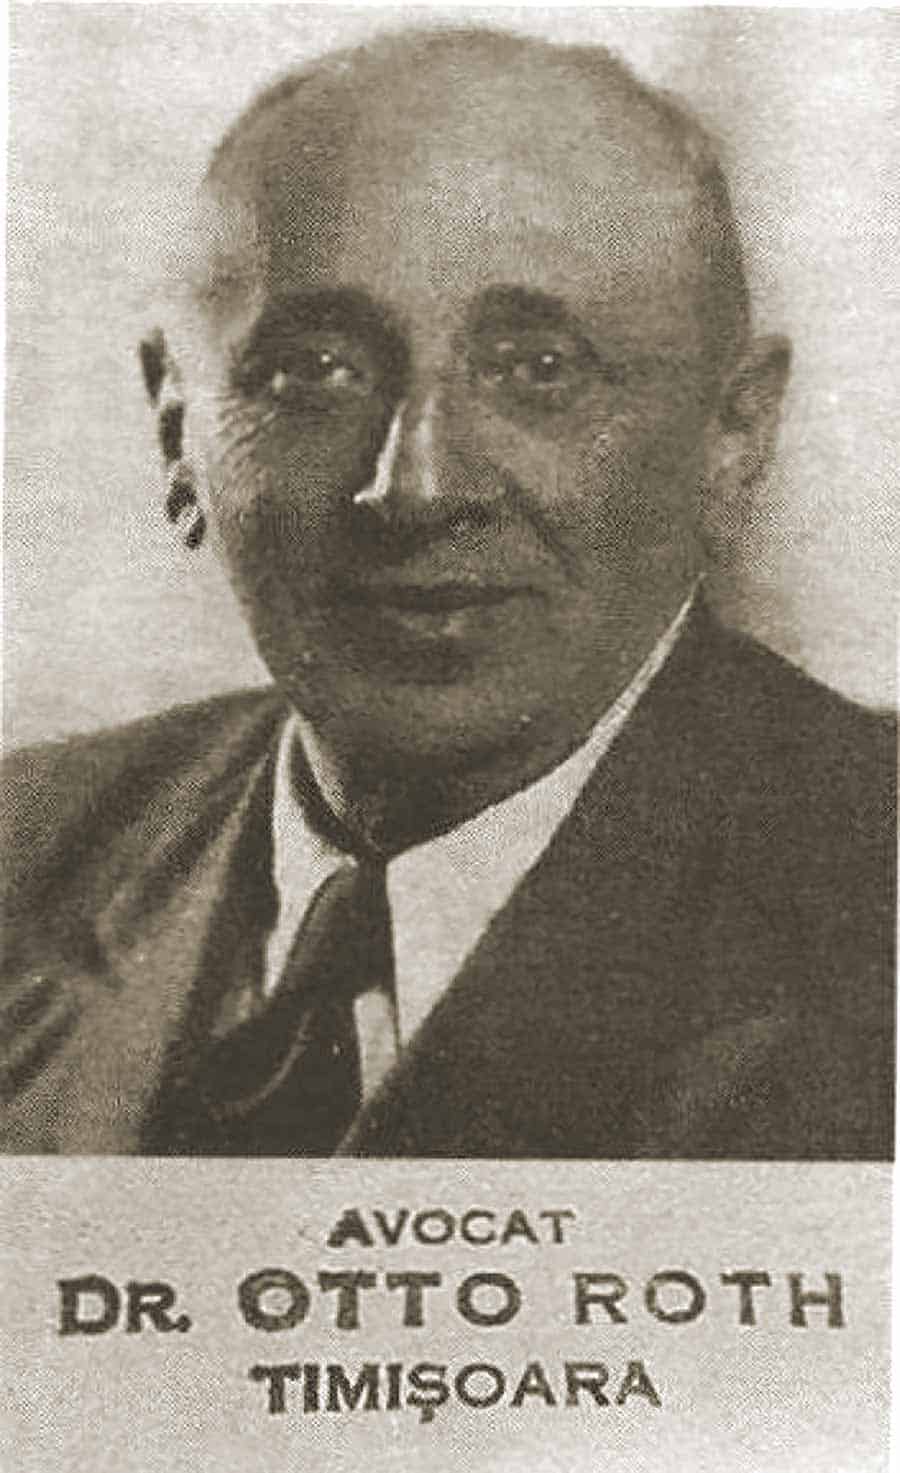 THE PRESIDENT OF THE REPUBLIC THAT LASTED 15 DAYS: Otto Roth, a German politician from Timisoara